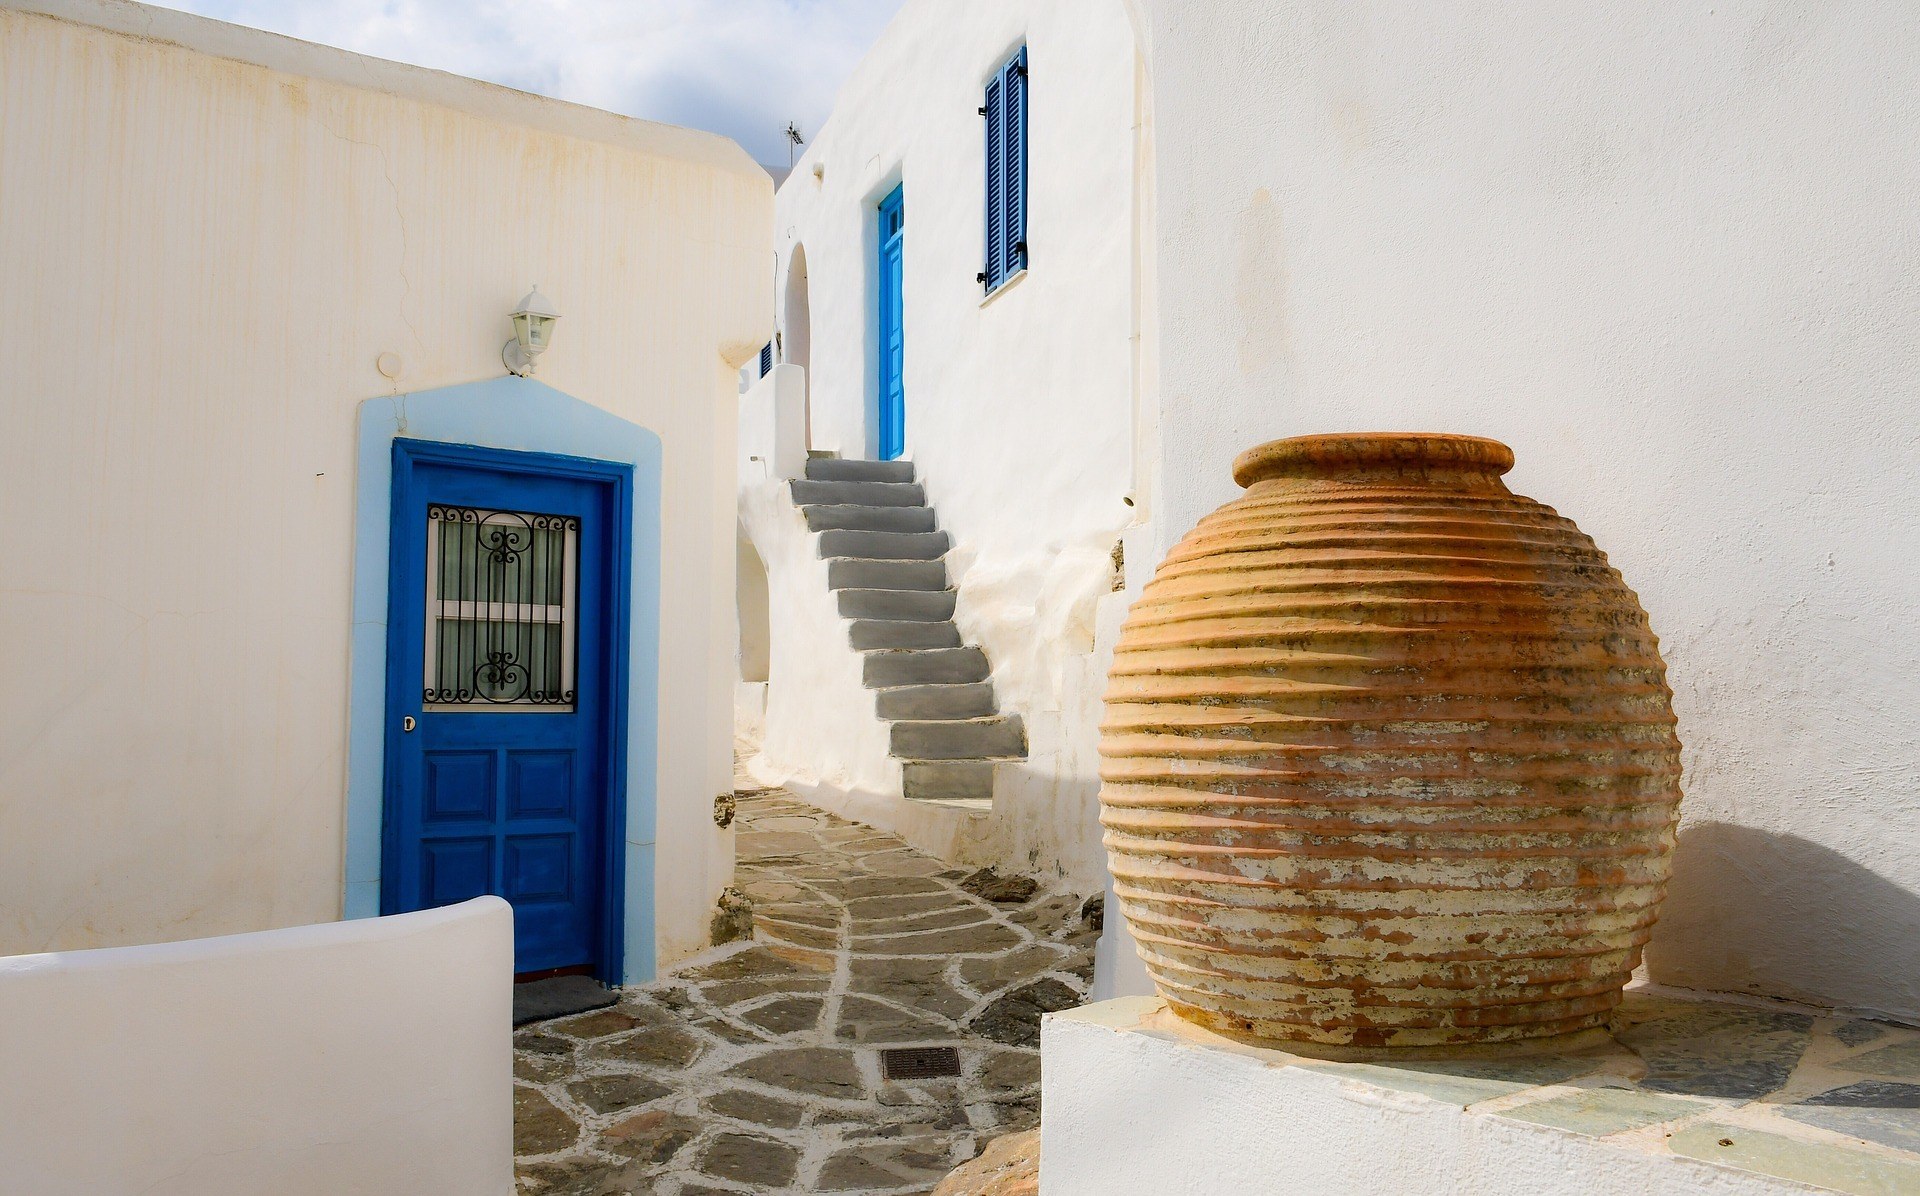 How to Spend 7 Days Island-Hopping in Greece